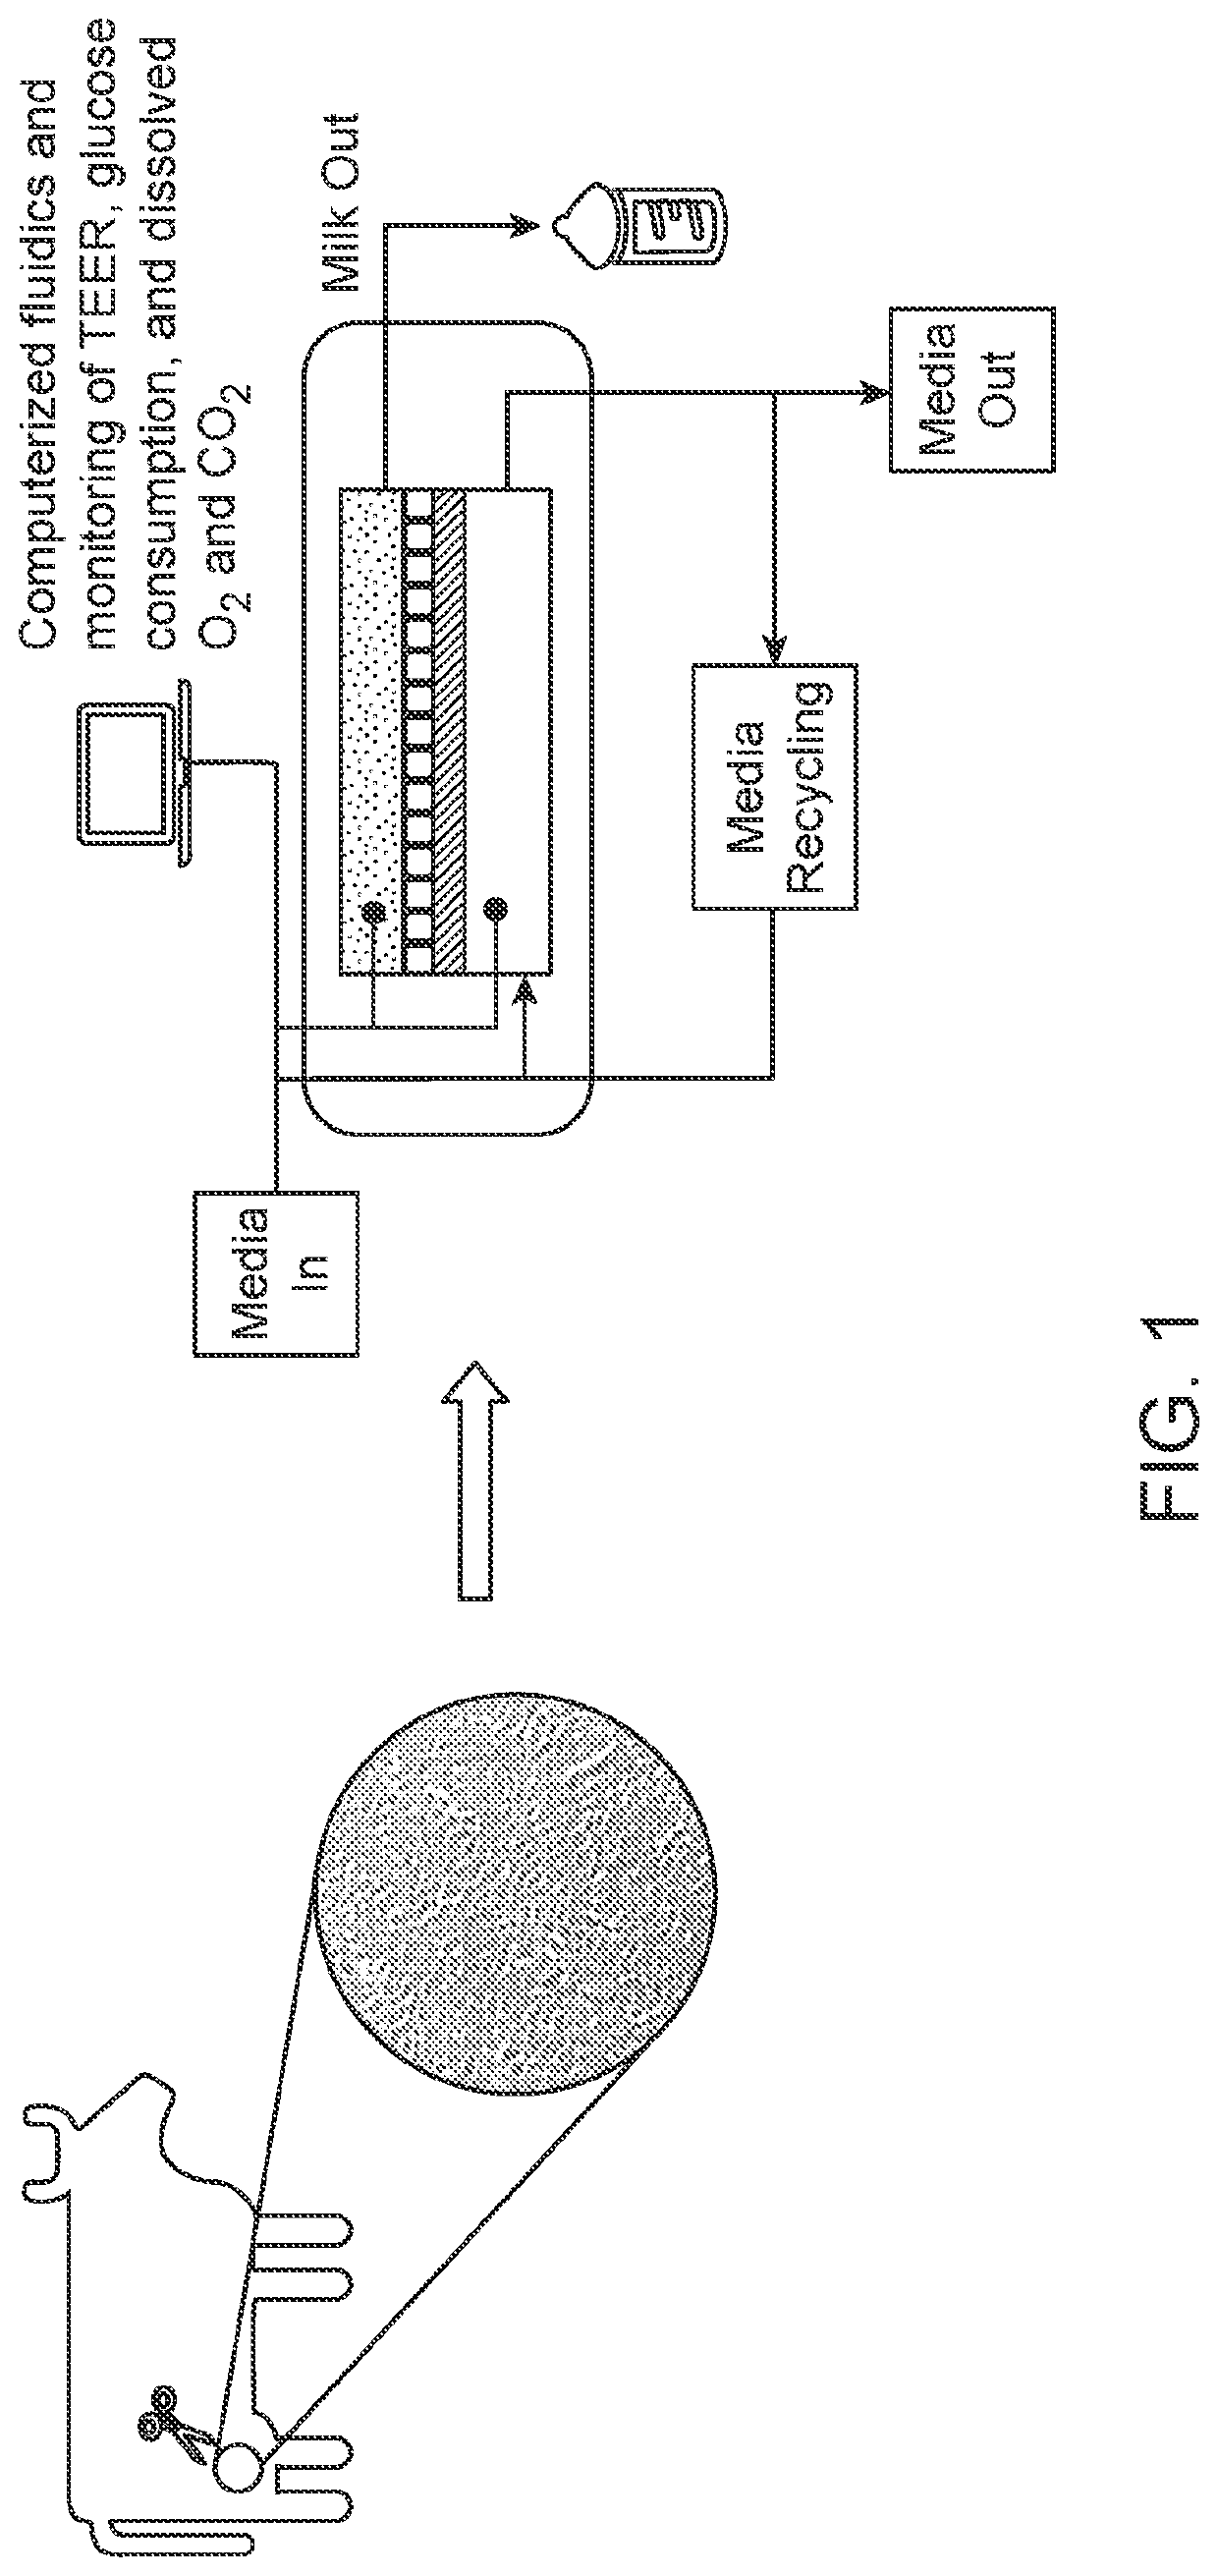 Live cell constructs for production of cultured milk product and methods using the same